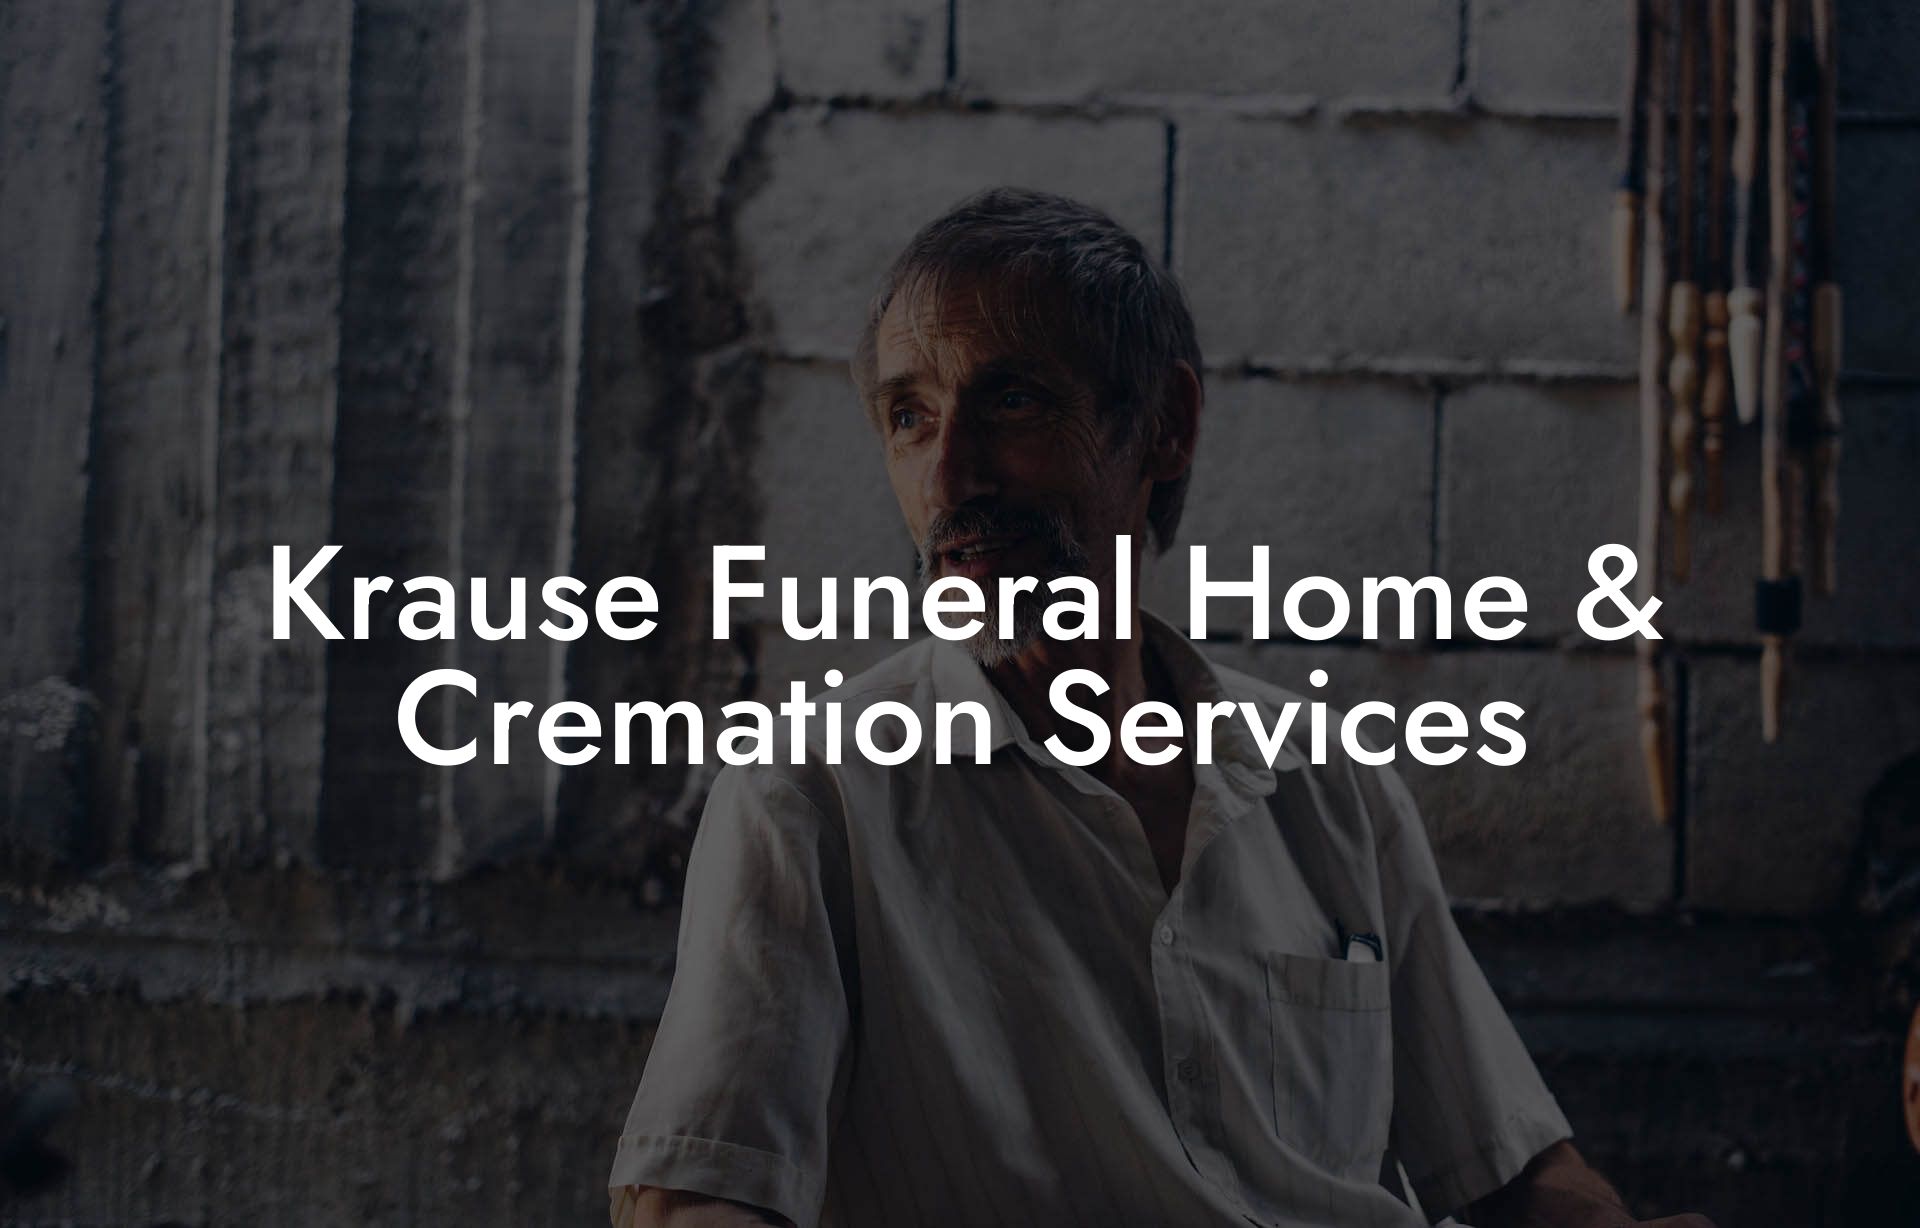 Krause Funeral Home & Cremation Services